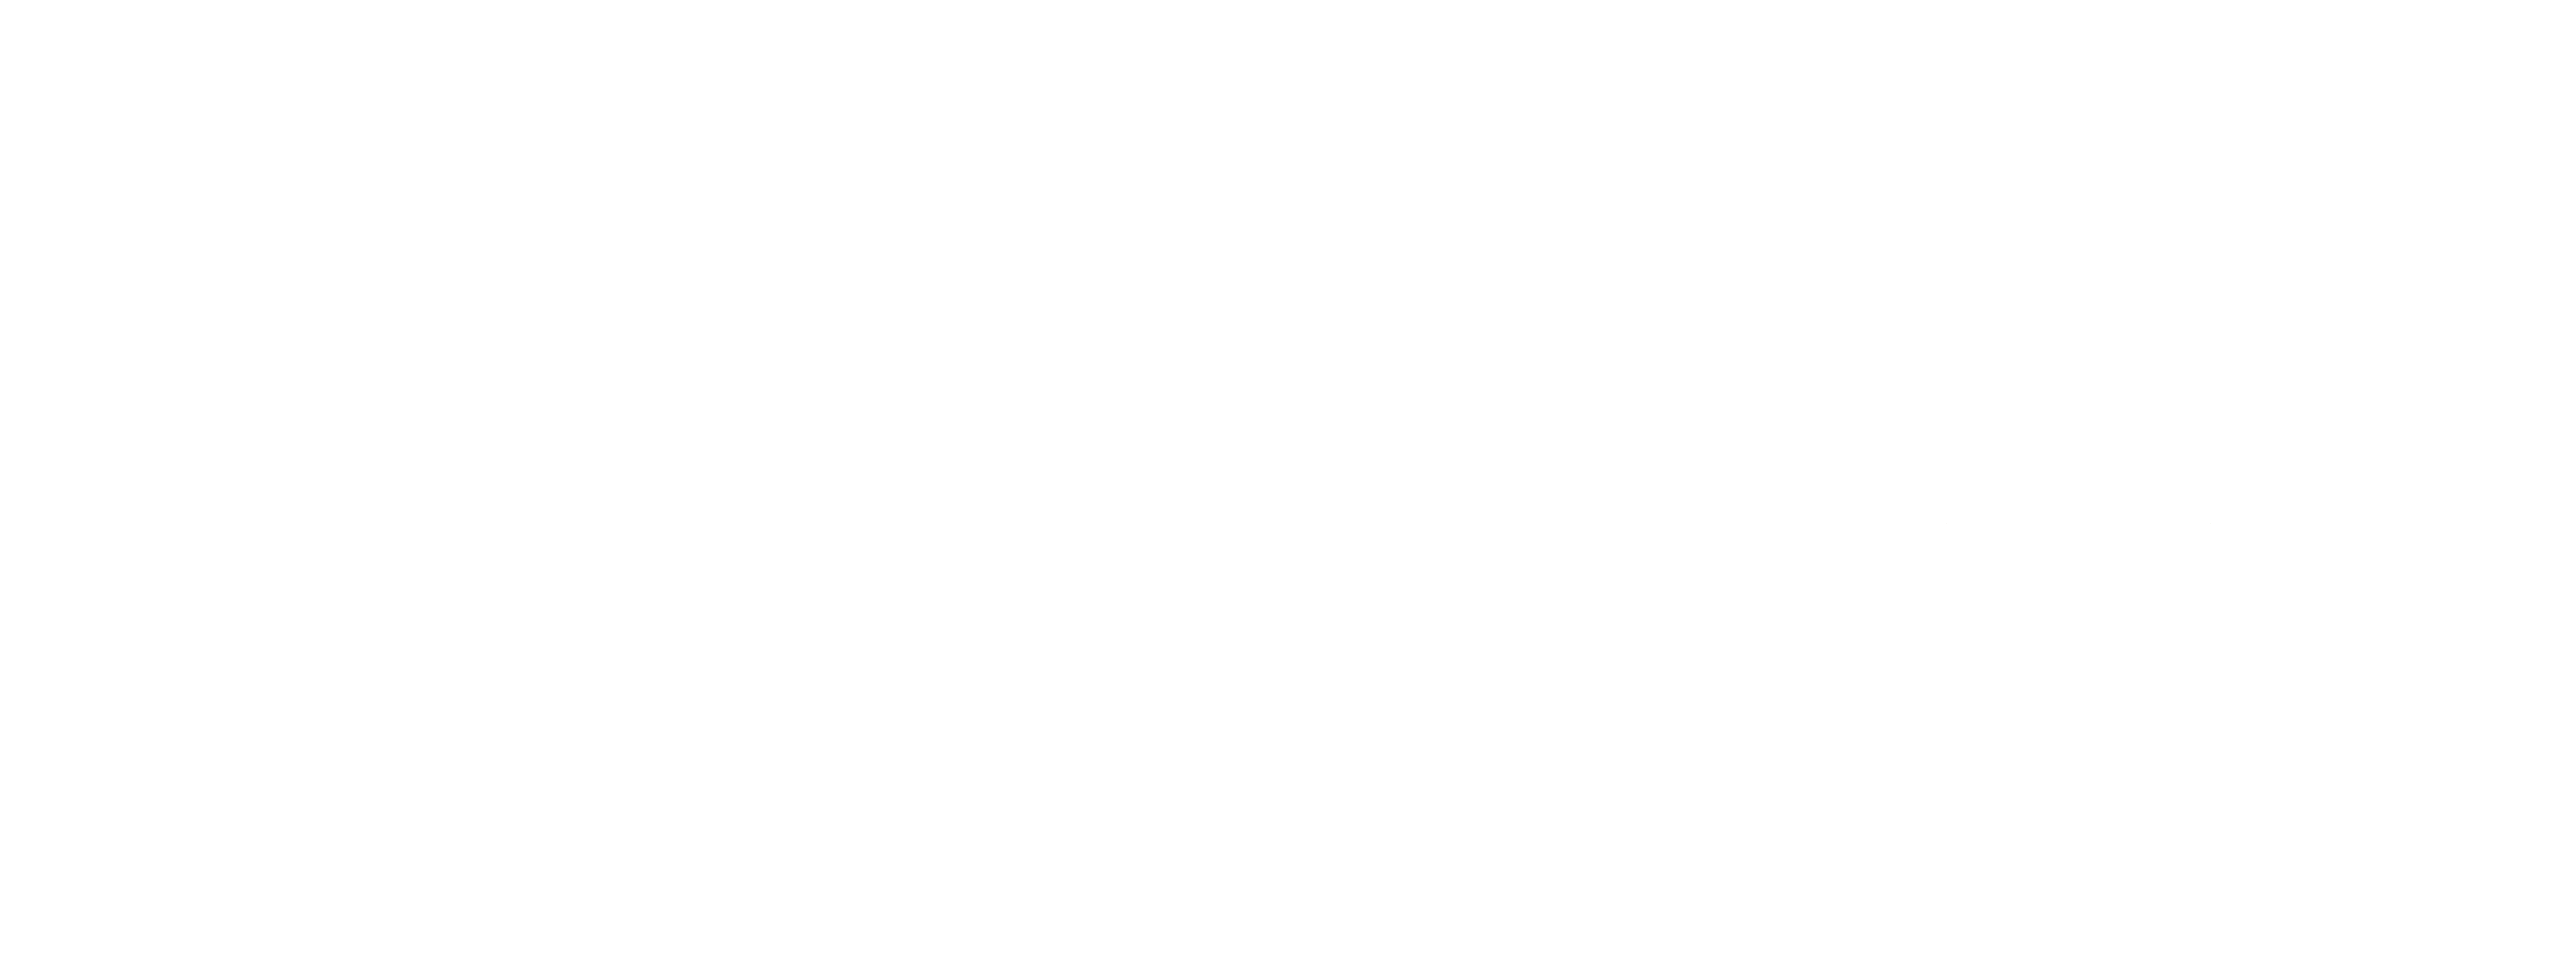 CCBHC and Quality Insights 50th Anniversary Logo